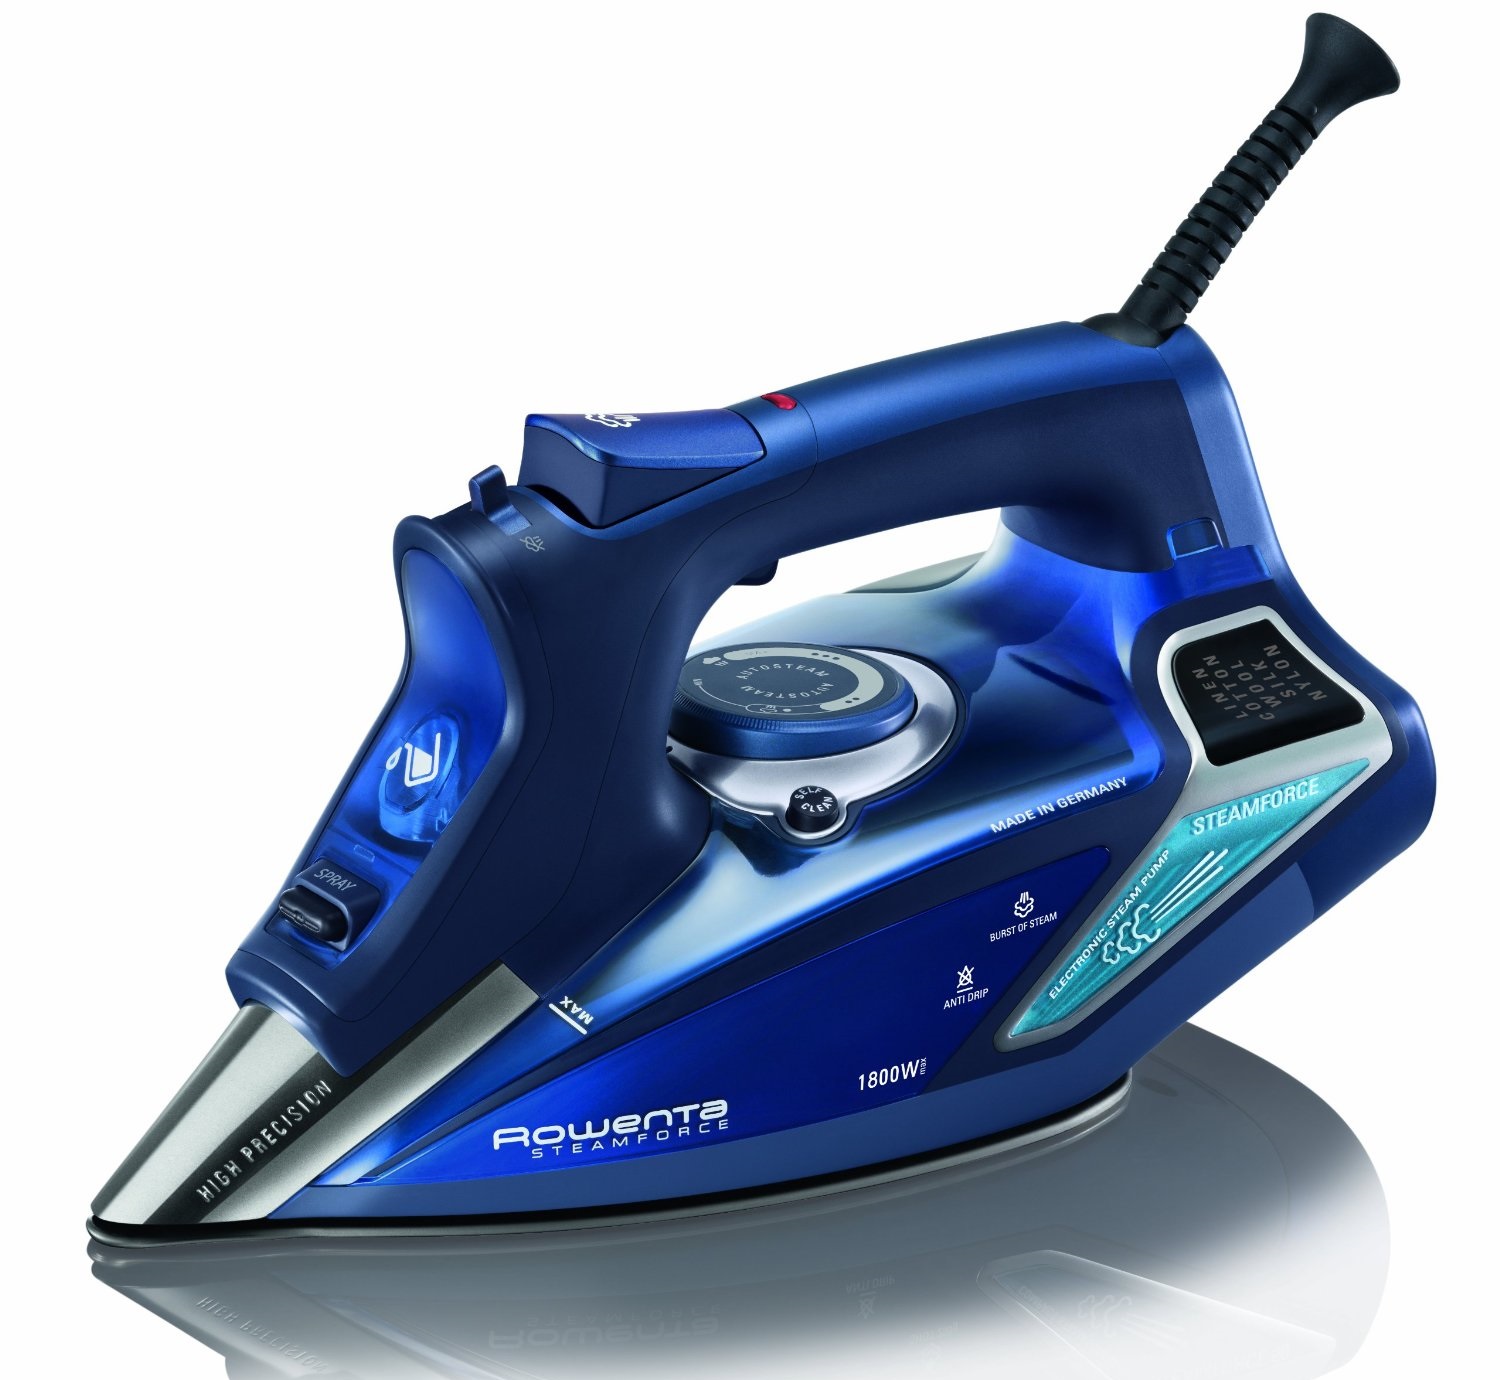 Rowenta DW9280 Review : Buy This Steam Force Iron?